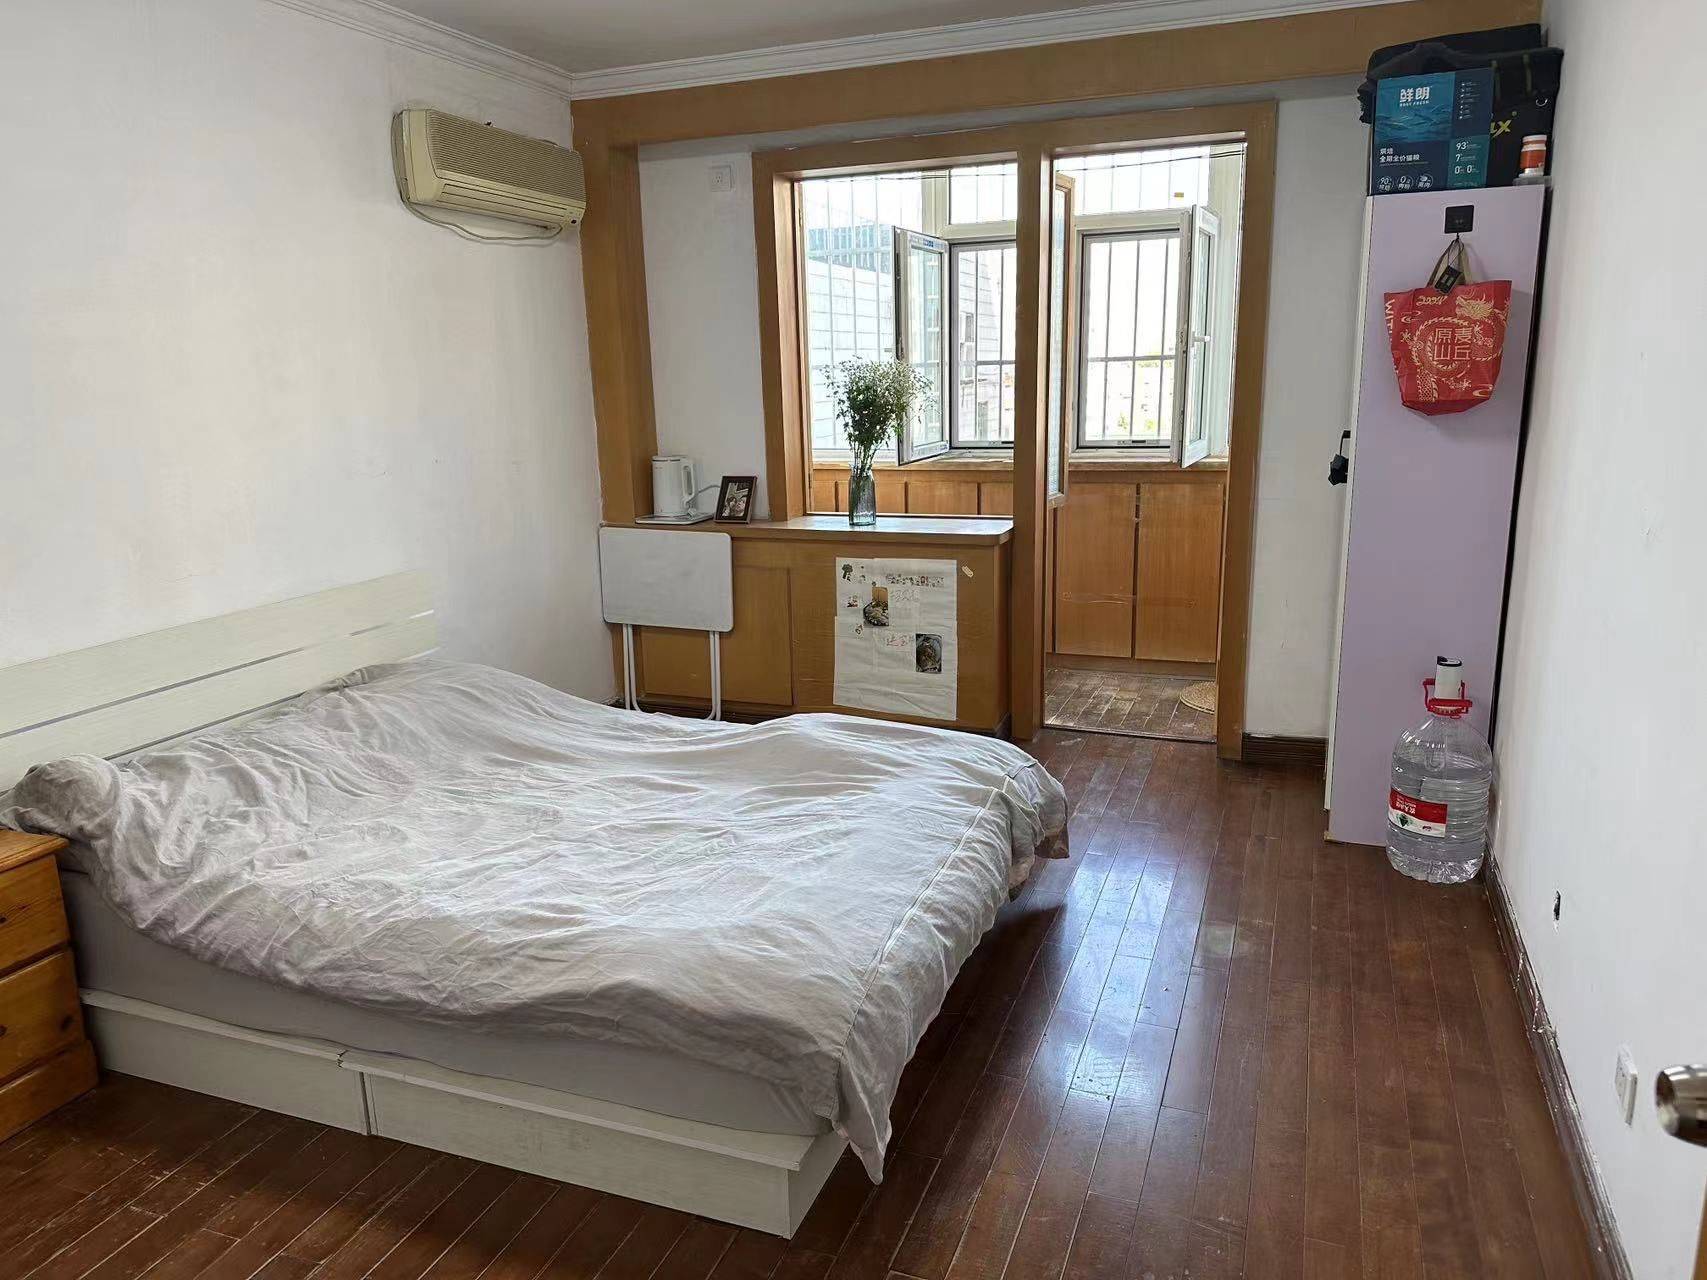 Beijing-Haidian-Cozy Home,Clean&Comfy,No Gender Limit